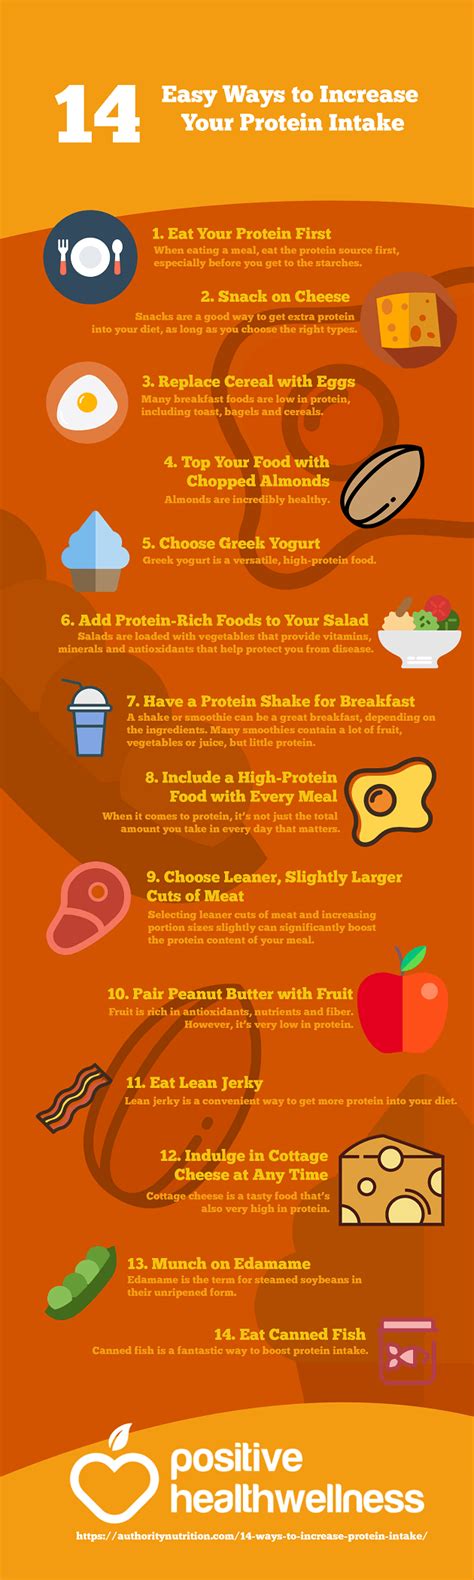 Easy Ways To Increase Your Protein Intake Infographic